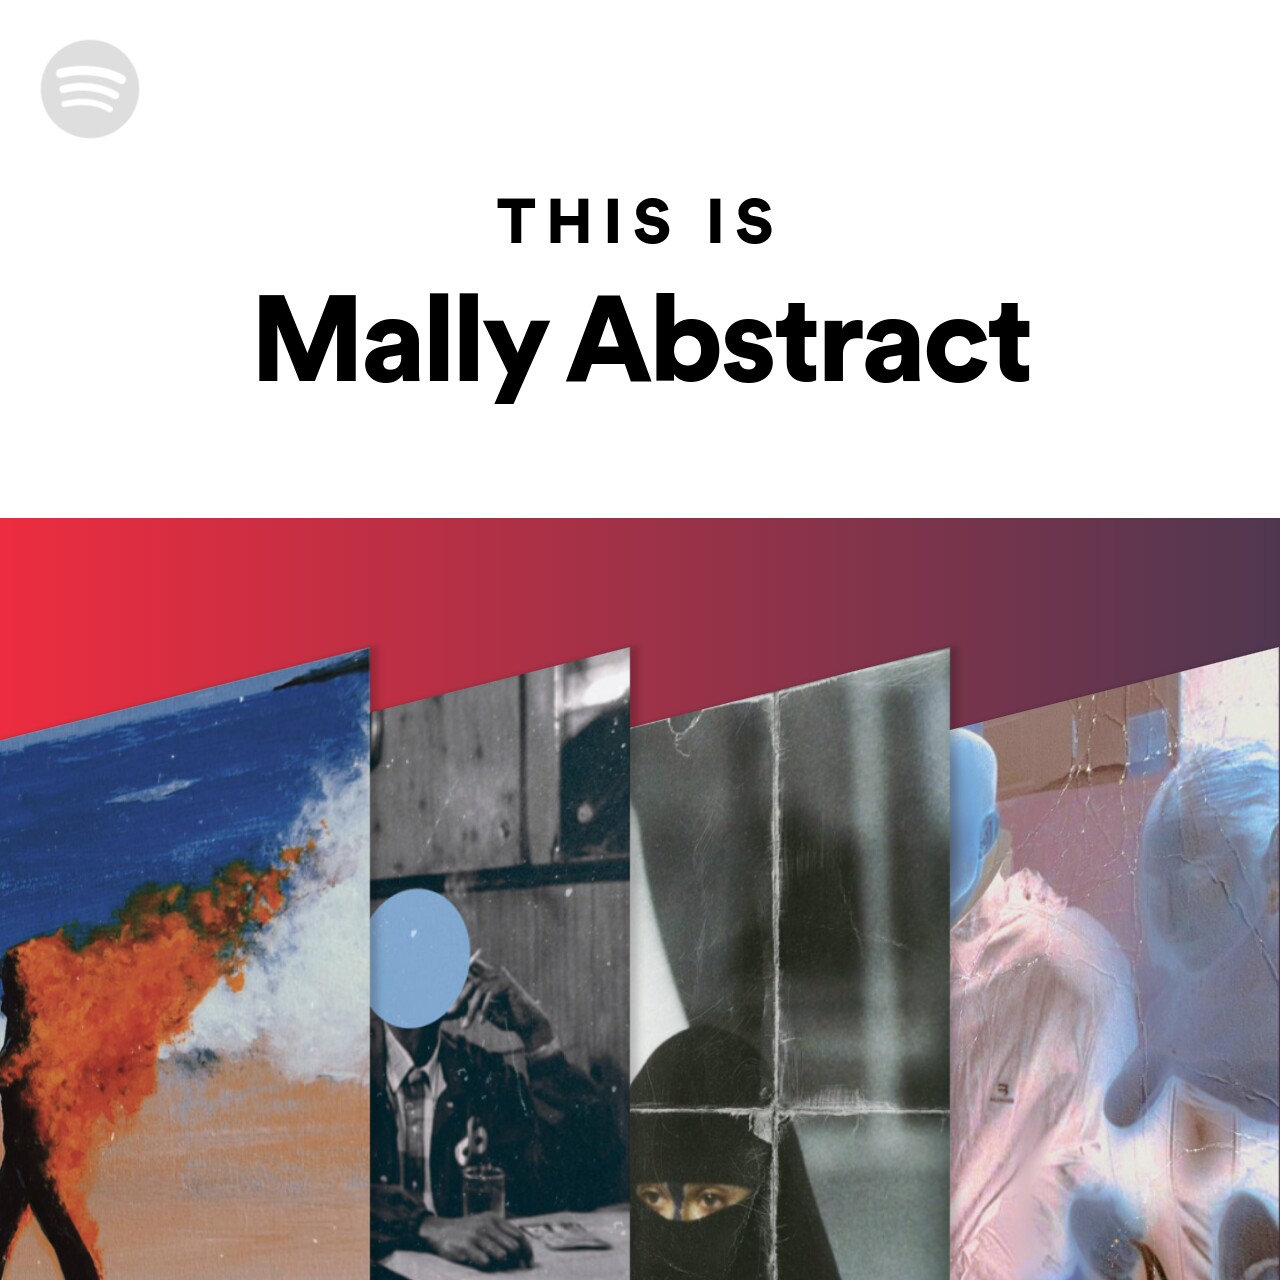 This Is Mally Abstract